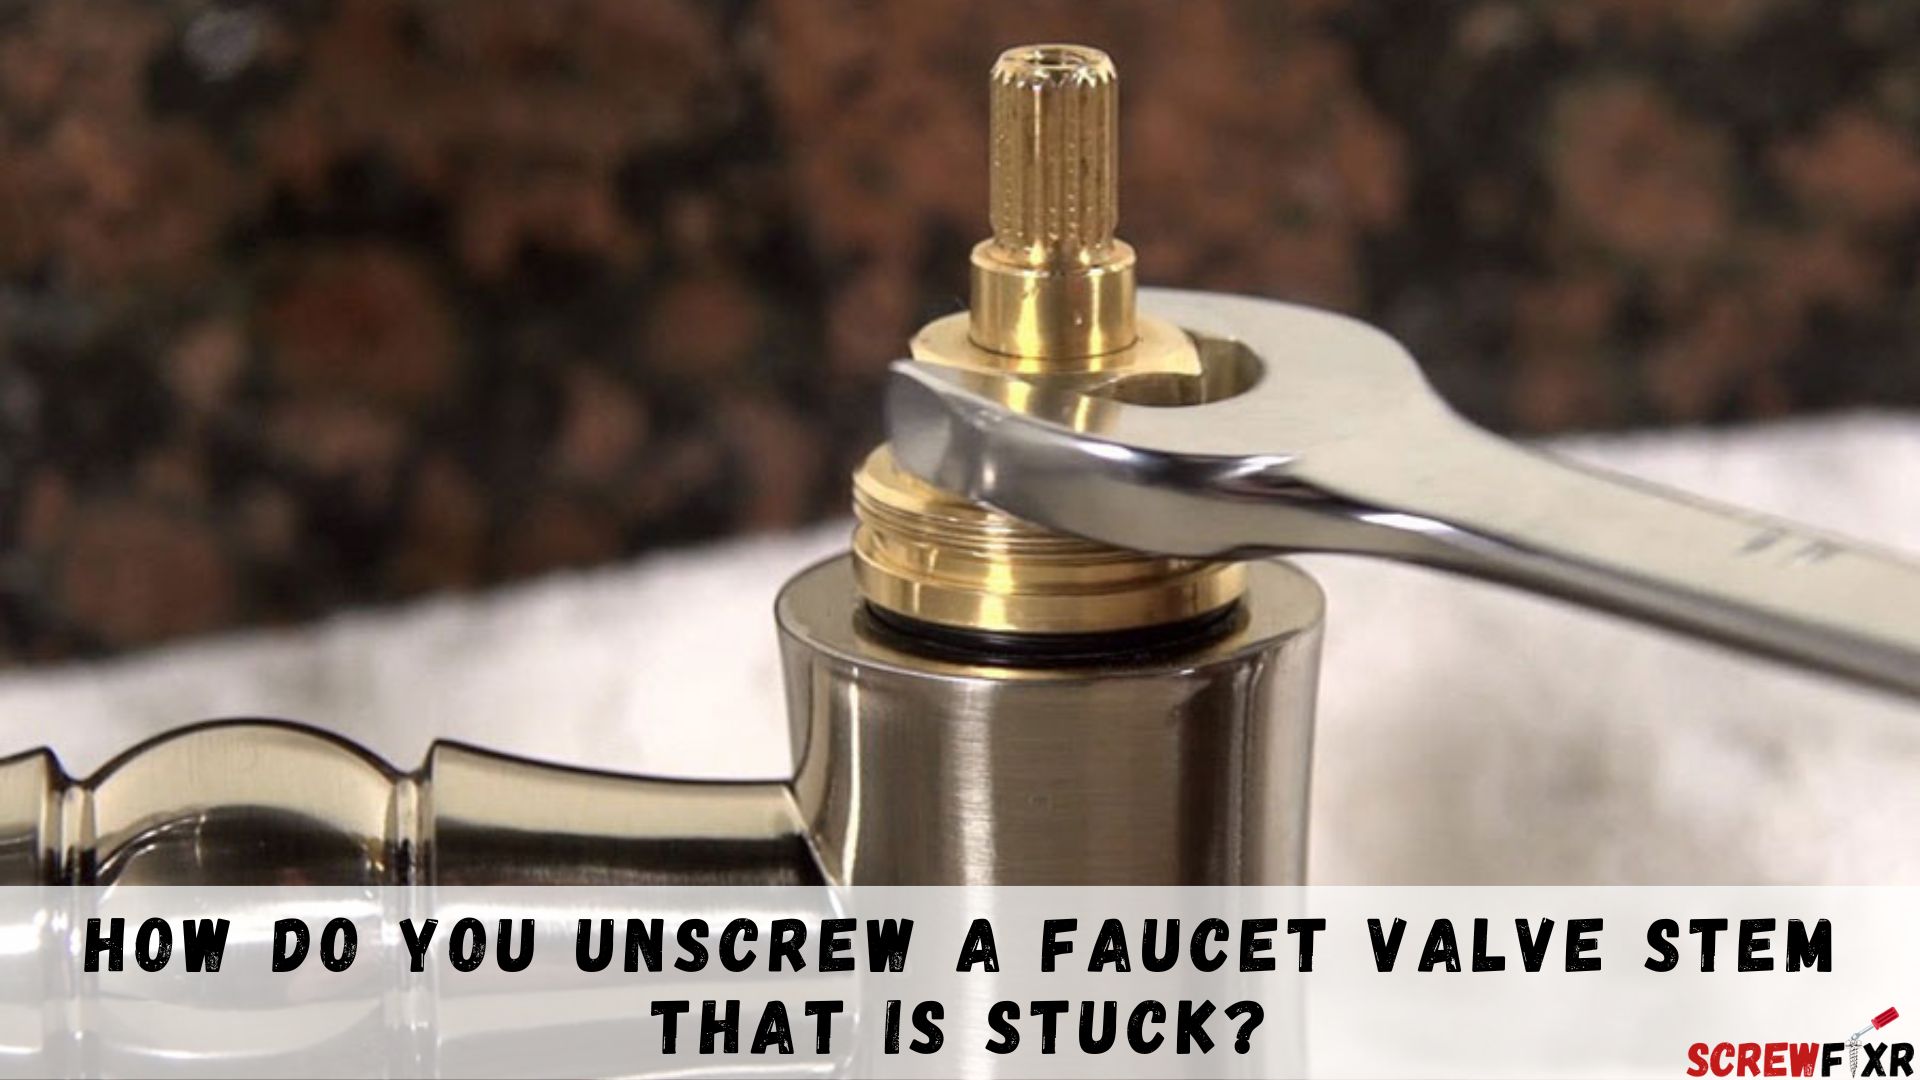 How Do You Unscrew A Faucet Valve Stem That Is Stuck